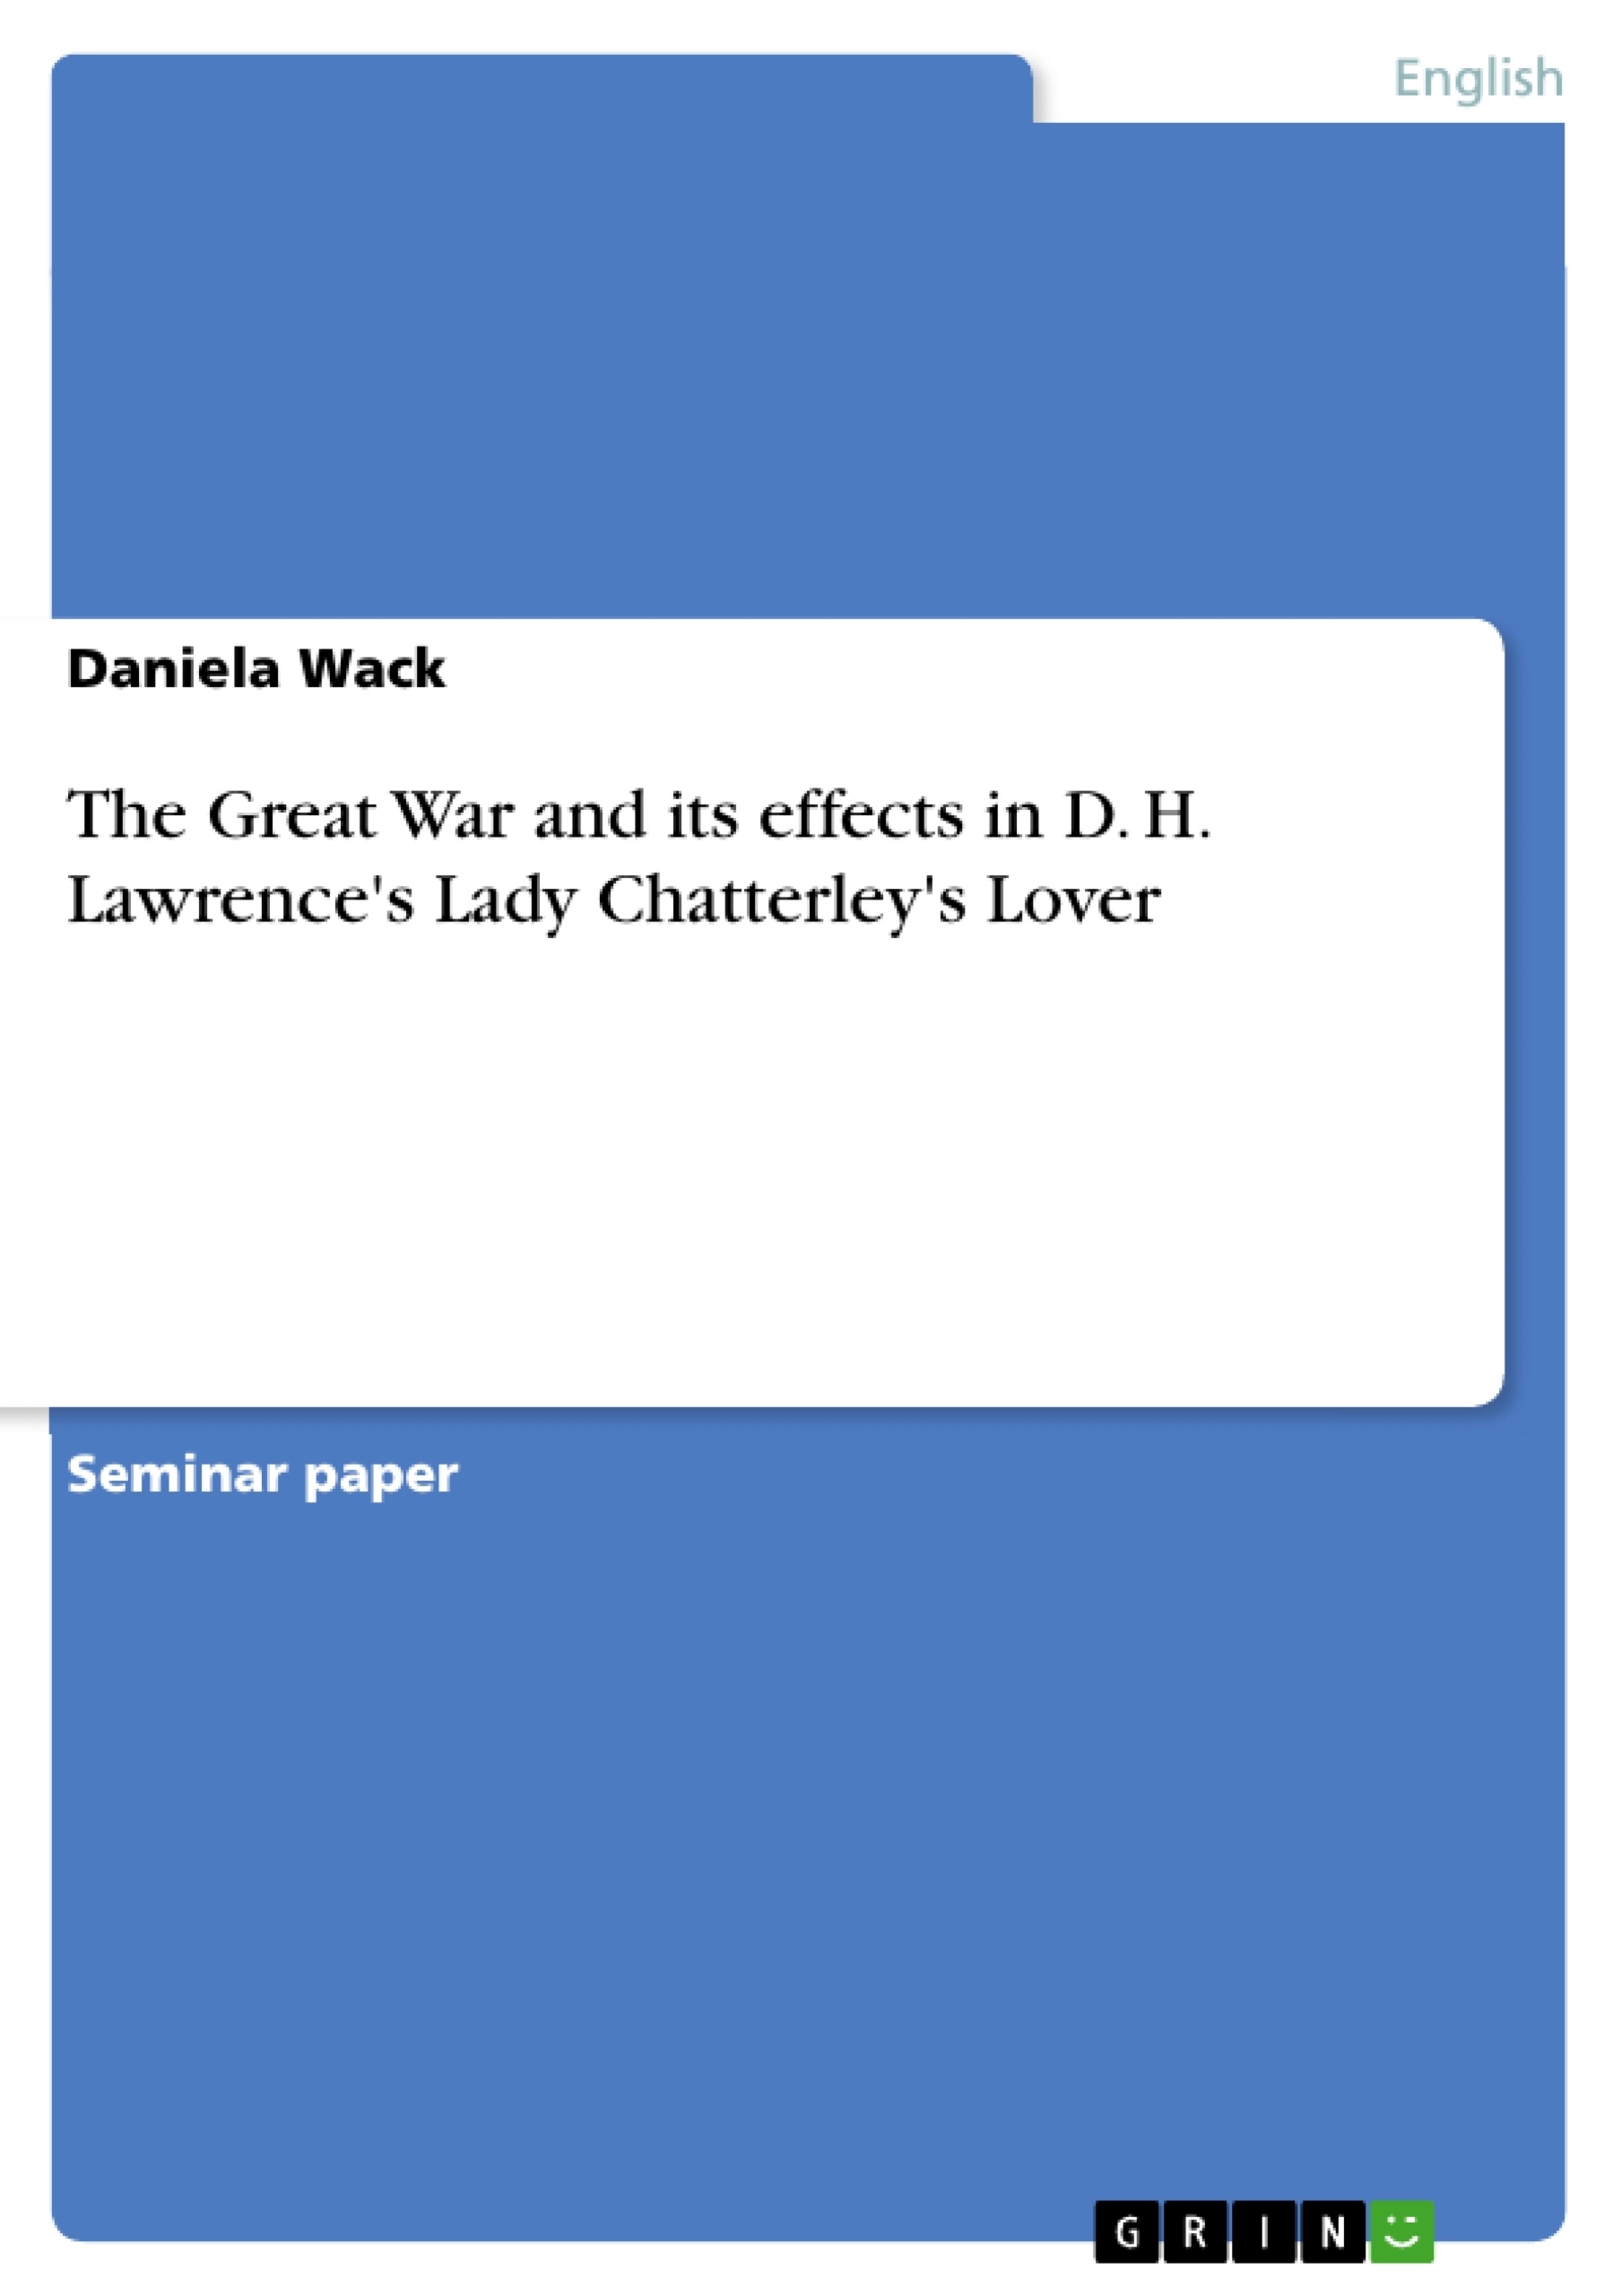 Title: The Great War and its effects in D. H. Lawrence's Lady Chatterley's Lover